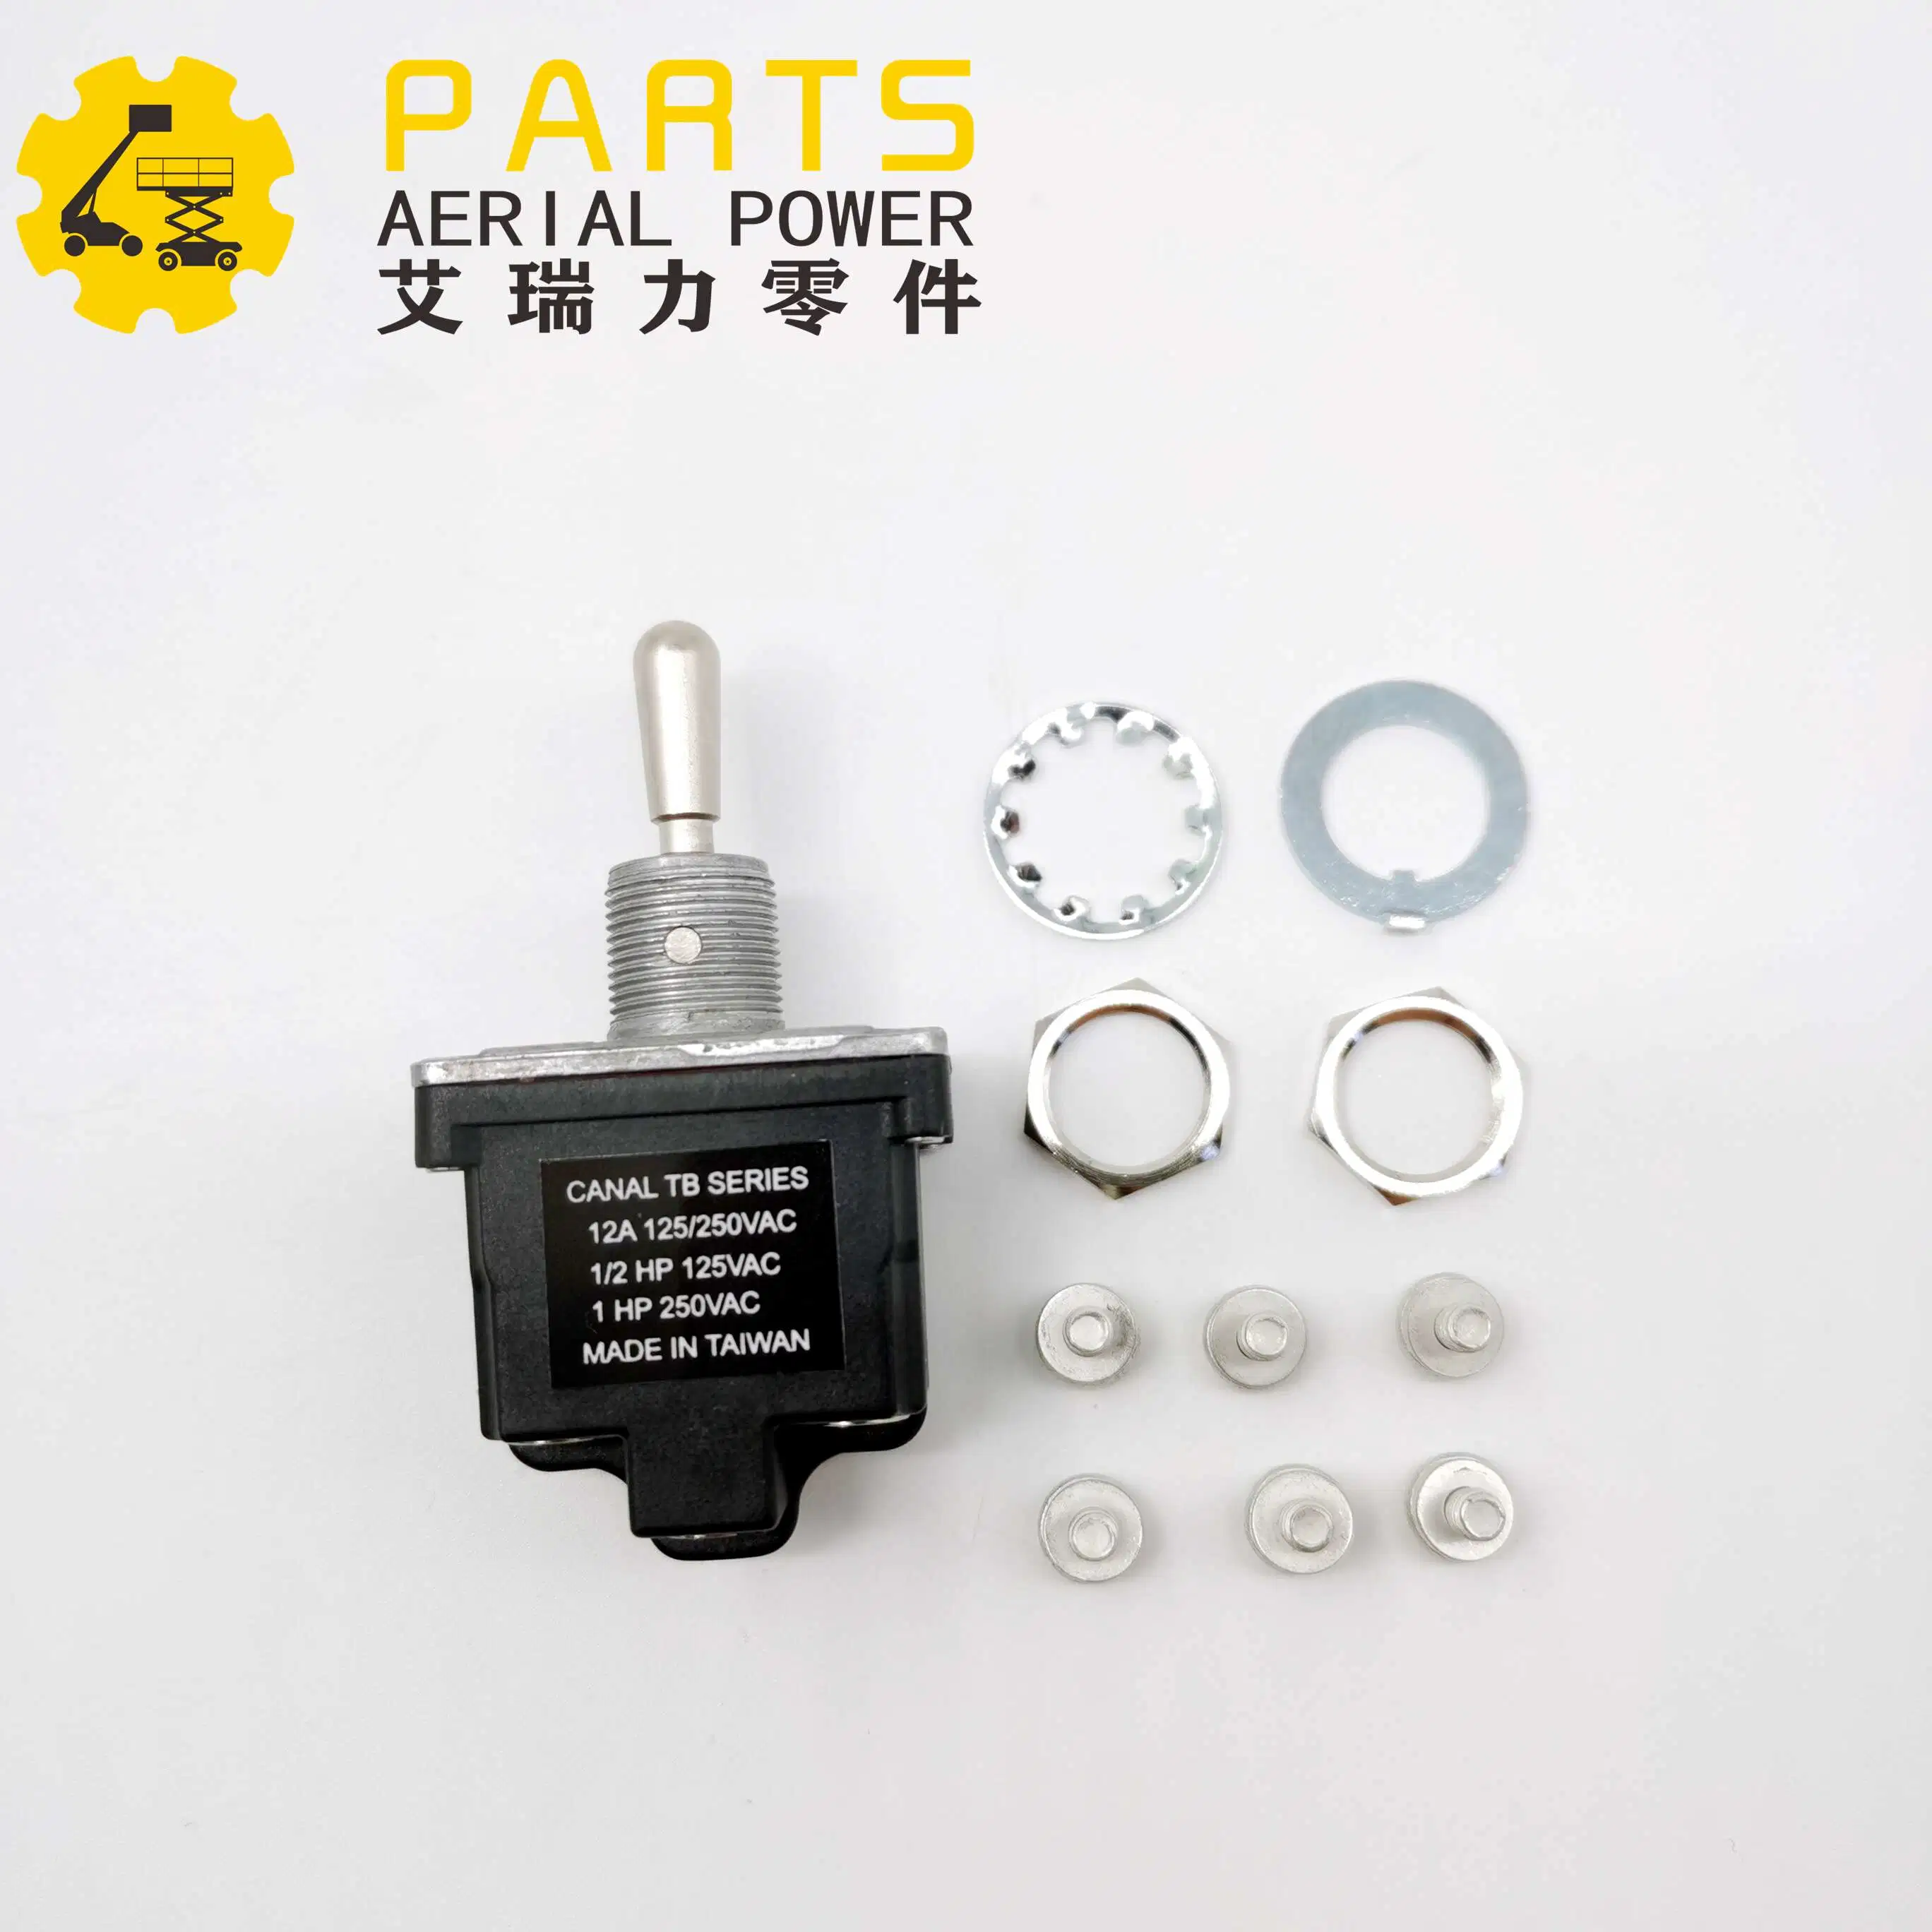 Hnarl 3POS Maint Dpdt Toggle Switch 13038 13038-Sgt